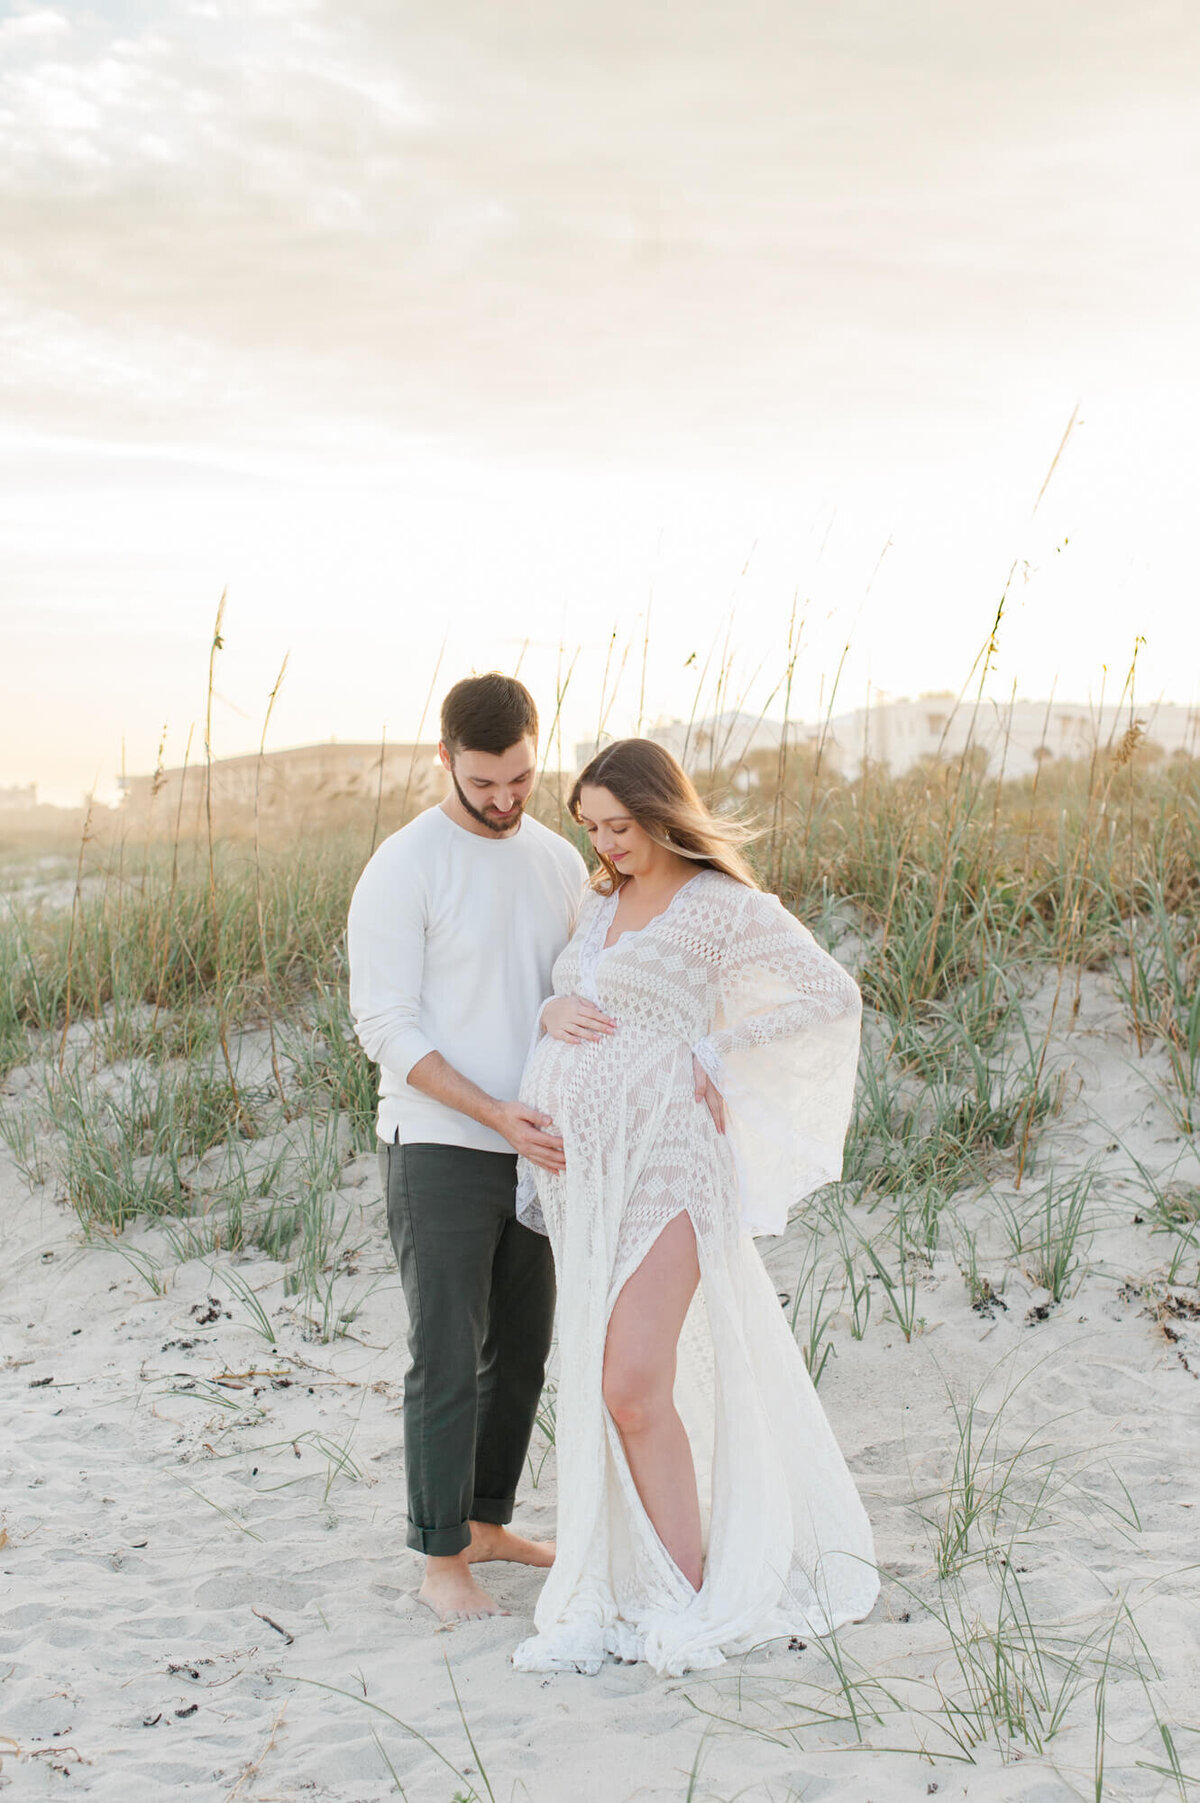 New parents stand in the dunes admiring moms belly and thikning of their new baby girl